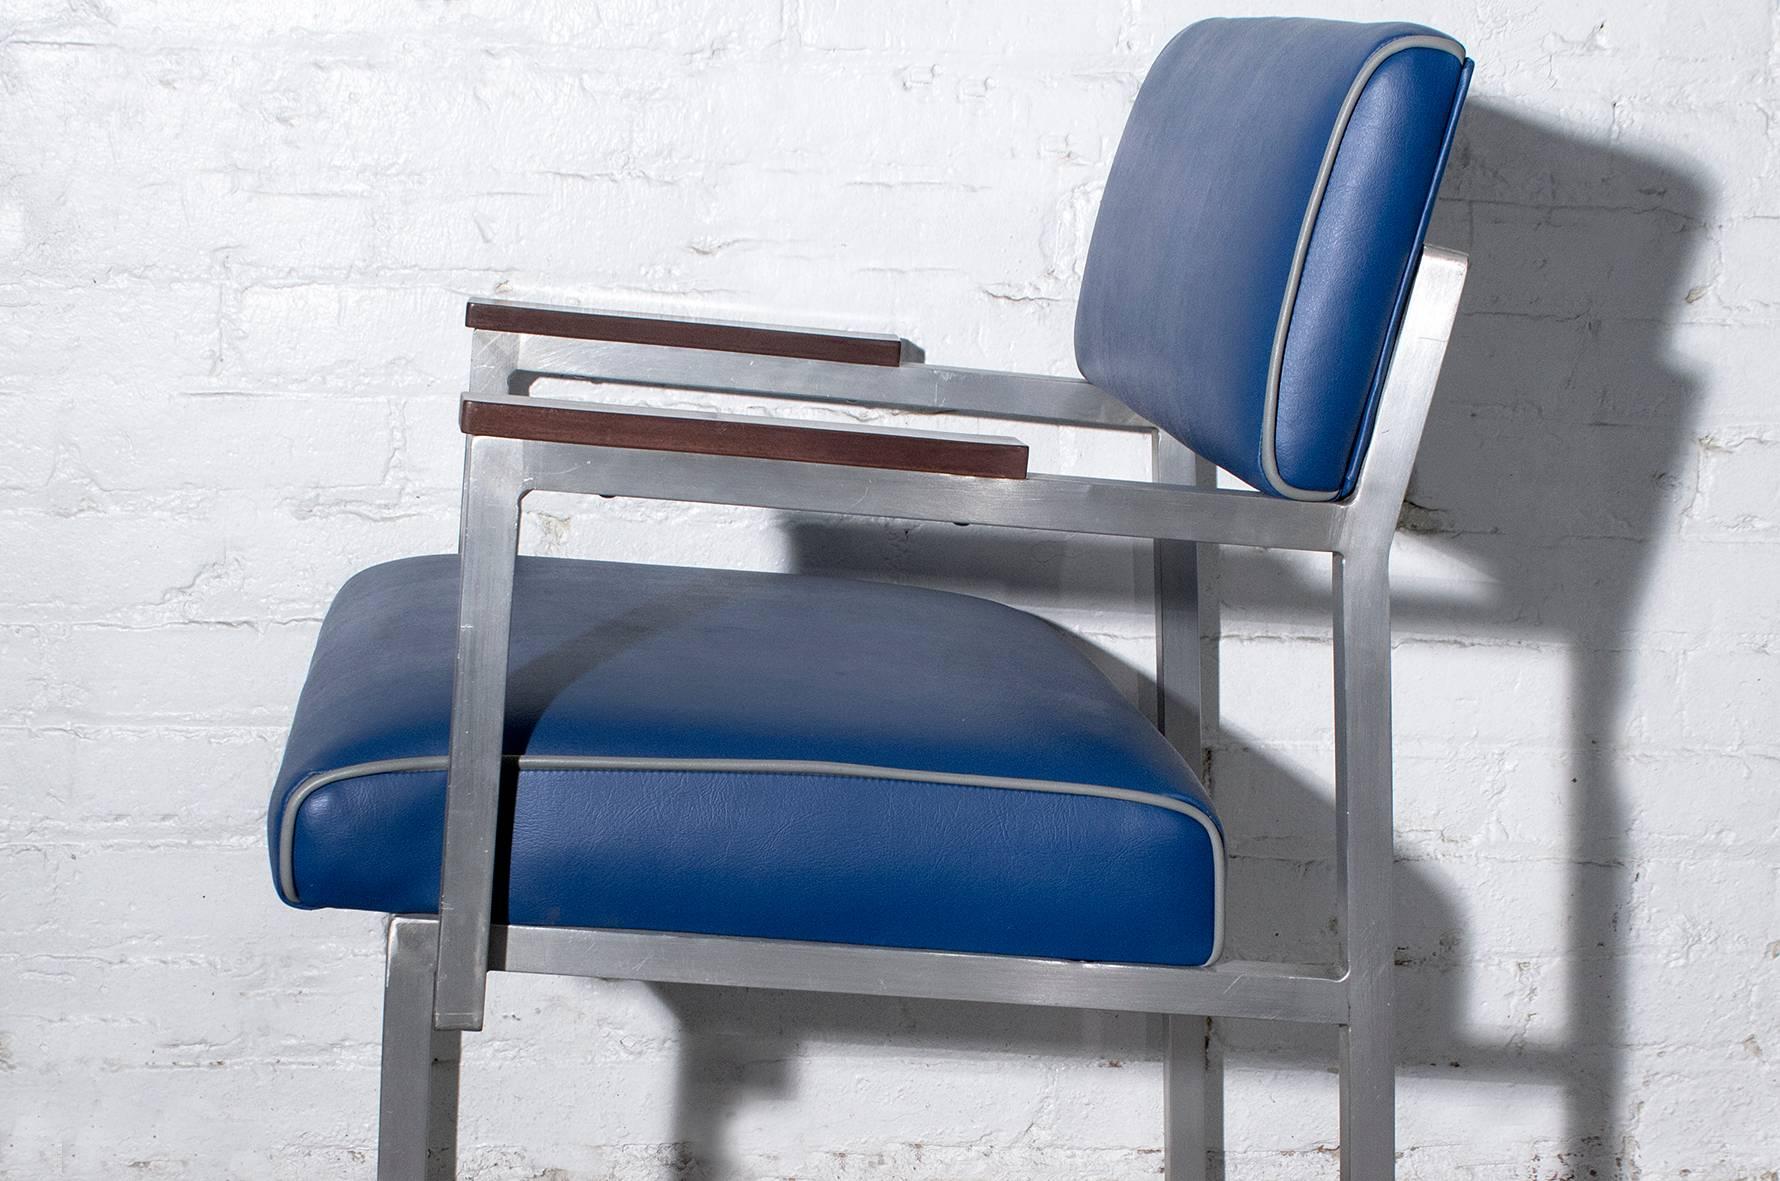 Excellent cole steel armchair with unusual modern Industrial styling. Composed of aluminium square tubing and wood arms. We reupholstered this beauty in high-quality blue vinyl with grey pipping.